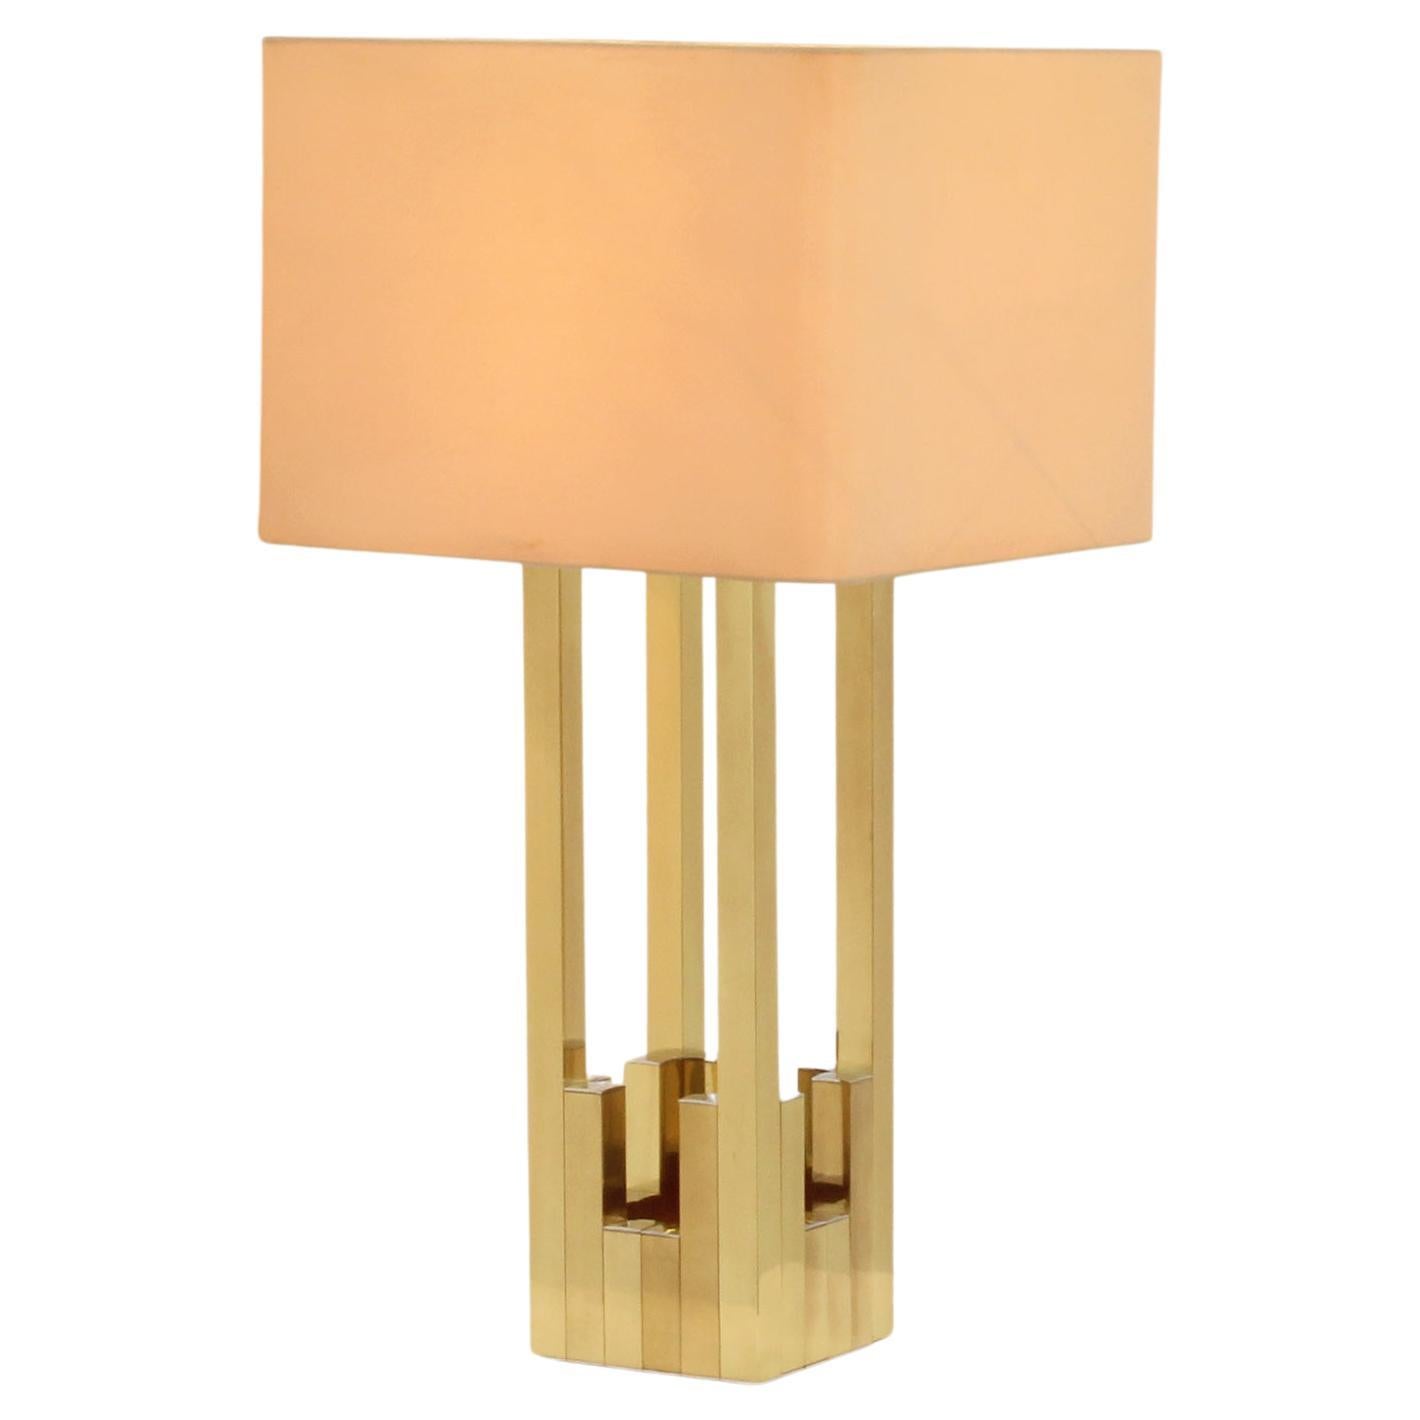 Large Lumica Brass Table Lamp, Spain, 1970s For Sale